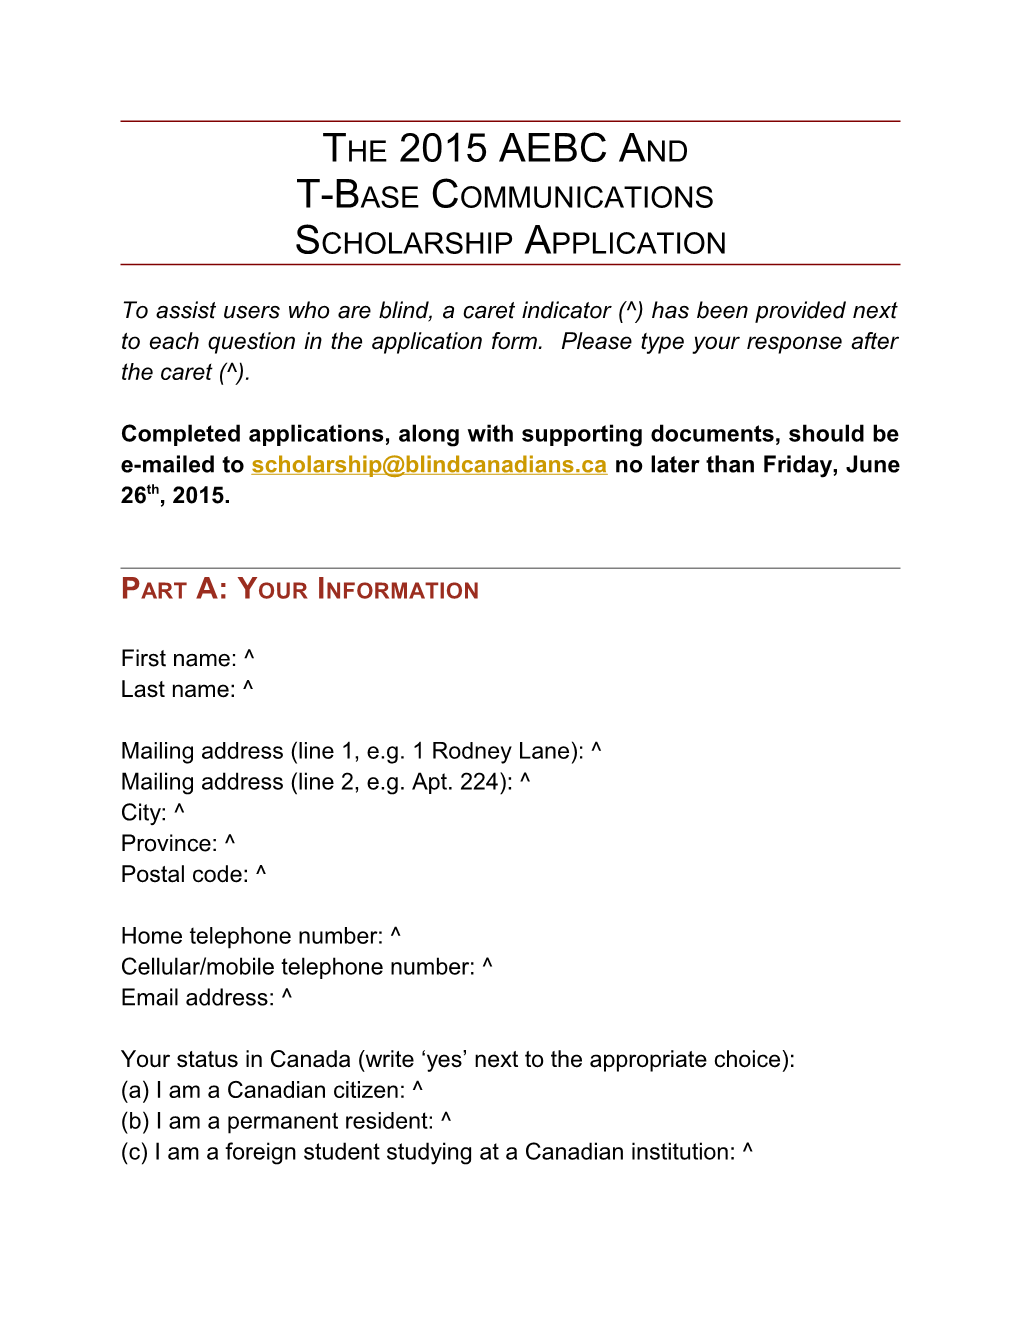 The 2015 AEBC and T-Base Communications Scholarship Application